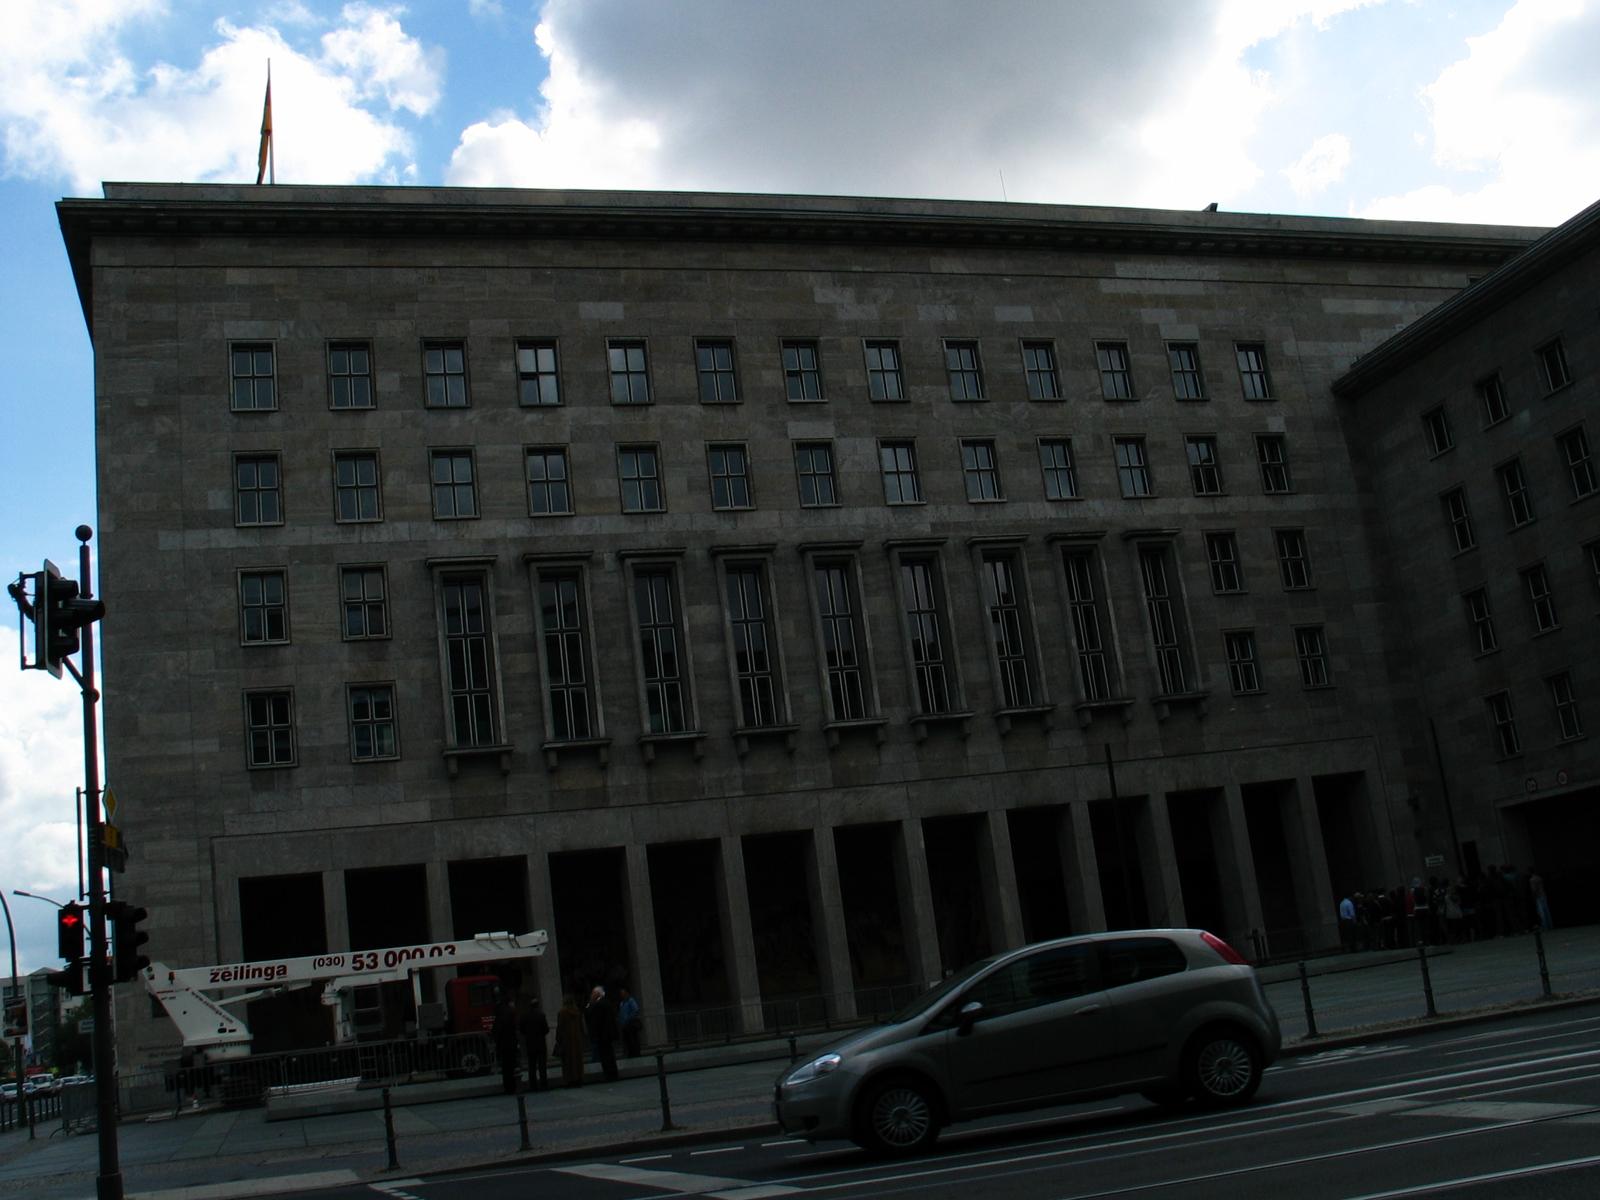 The Luftwaffe Headquarters / Ministry of Ministries